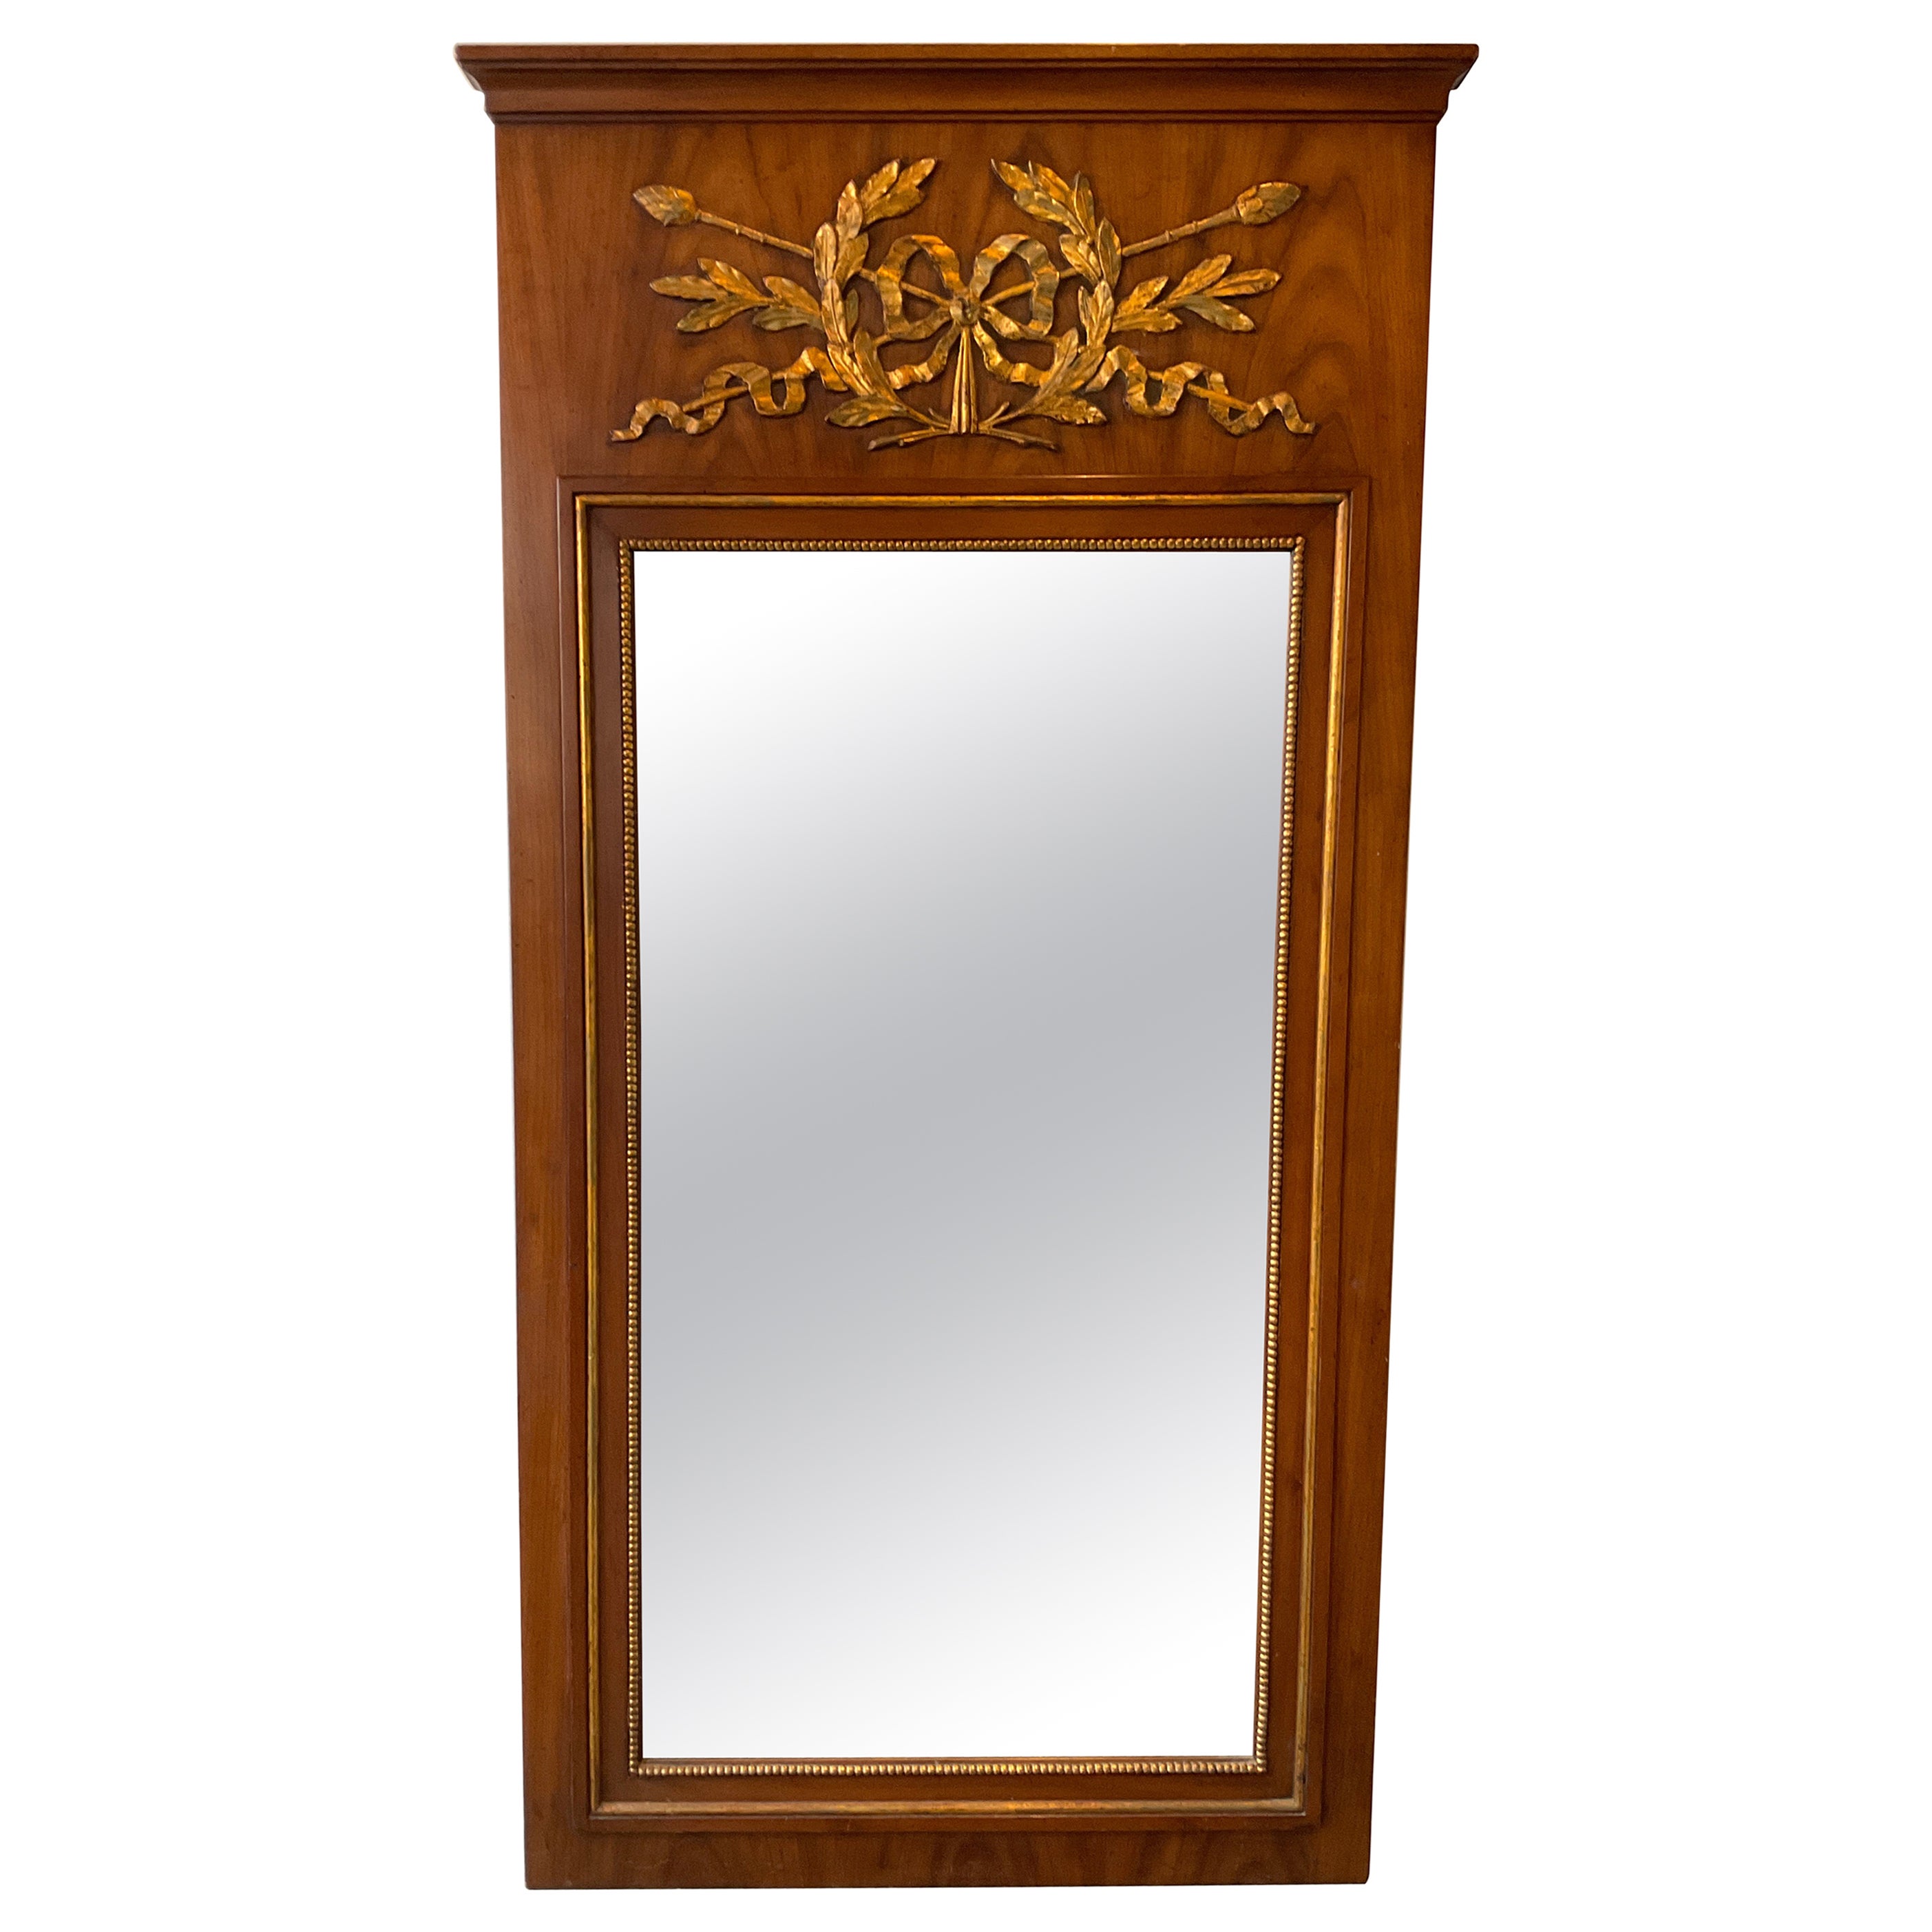 1960s, Wood Trumeau Mirror with Gilt Accents For Sale